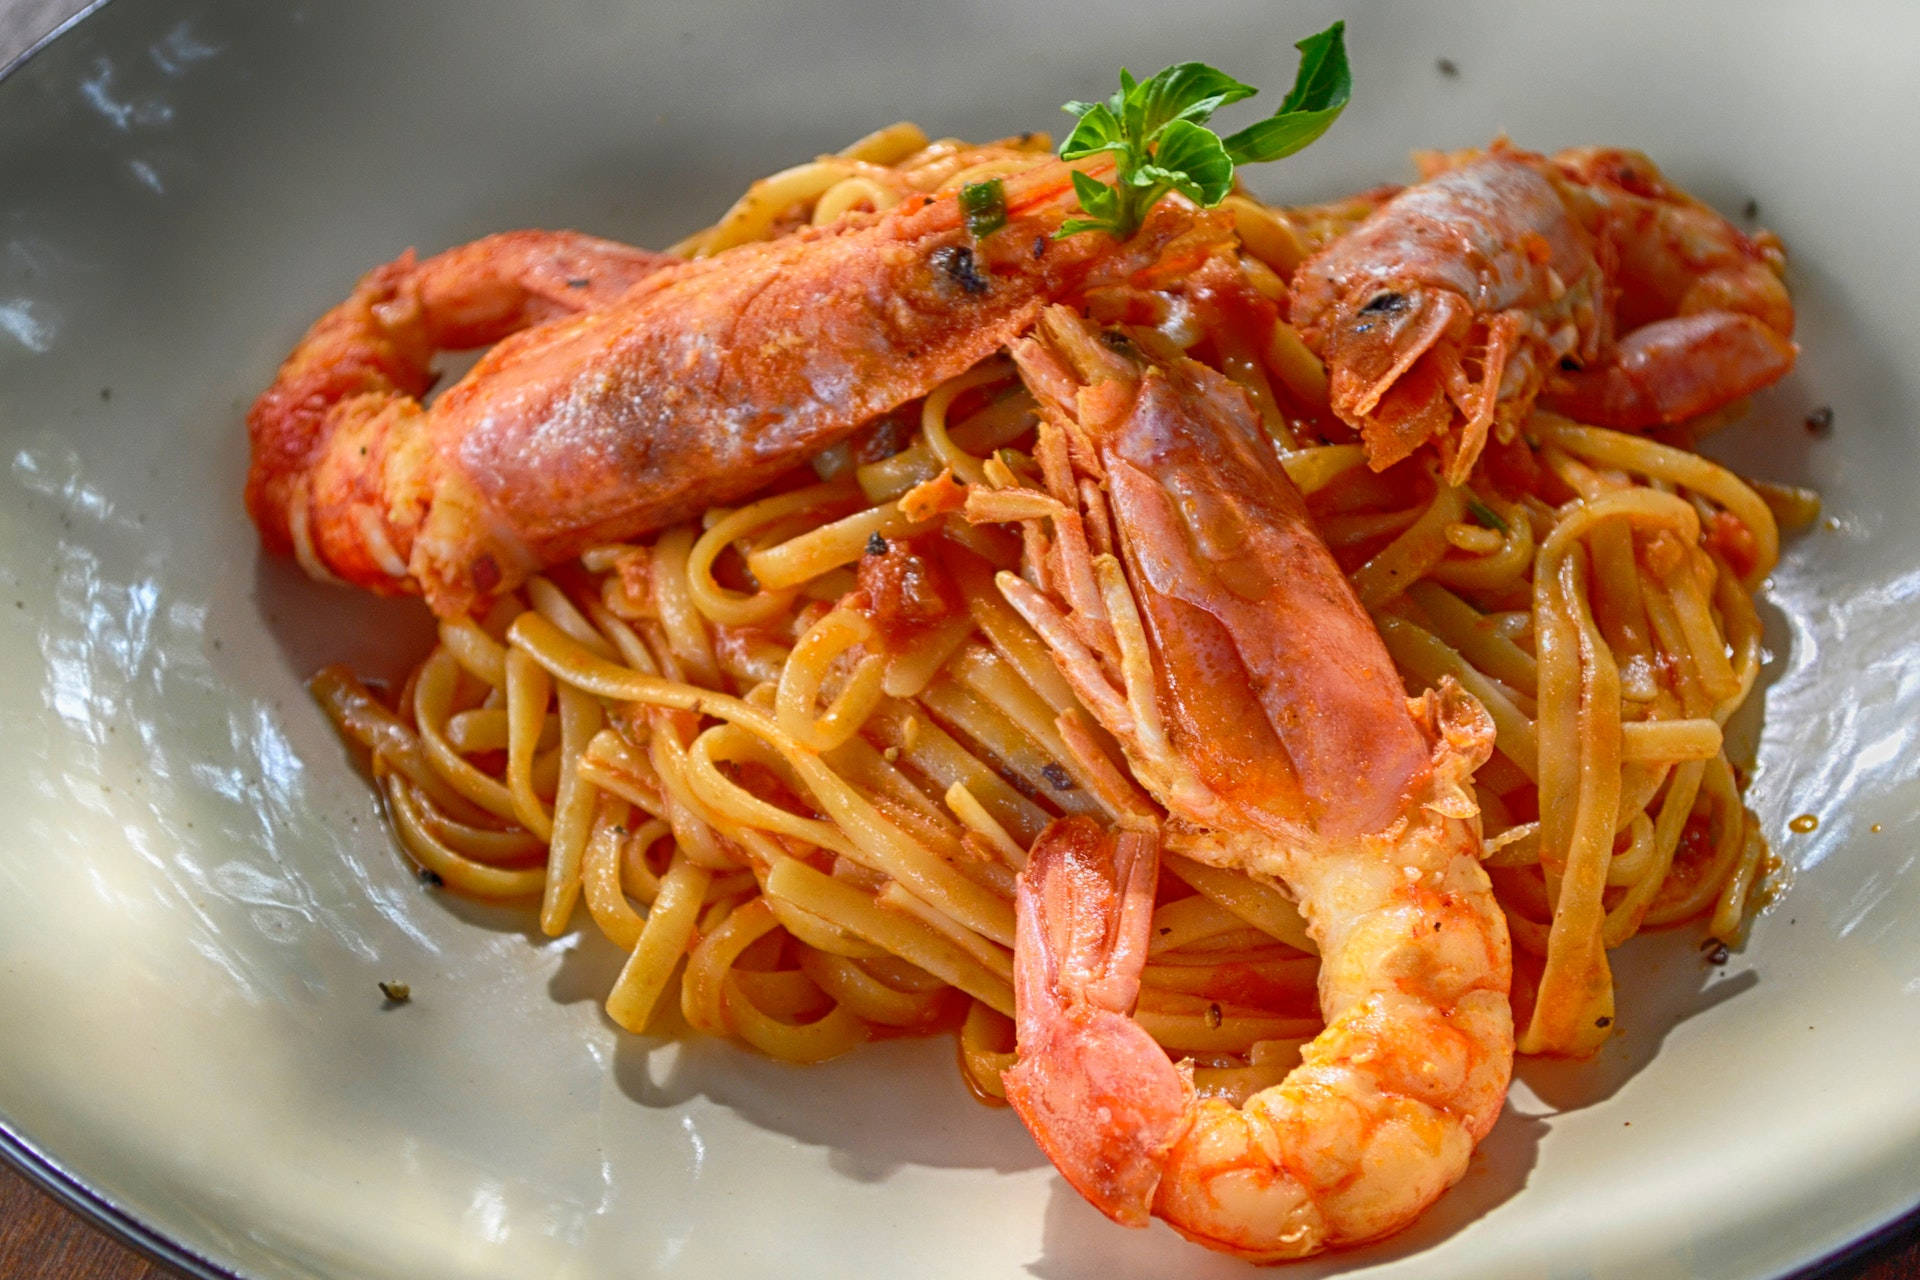 "Succulent Prawns Served with Tomato Pasta" Wallpaper